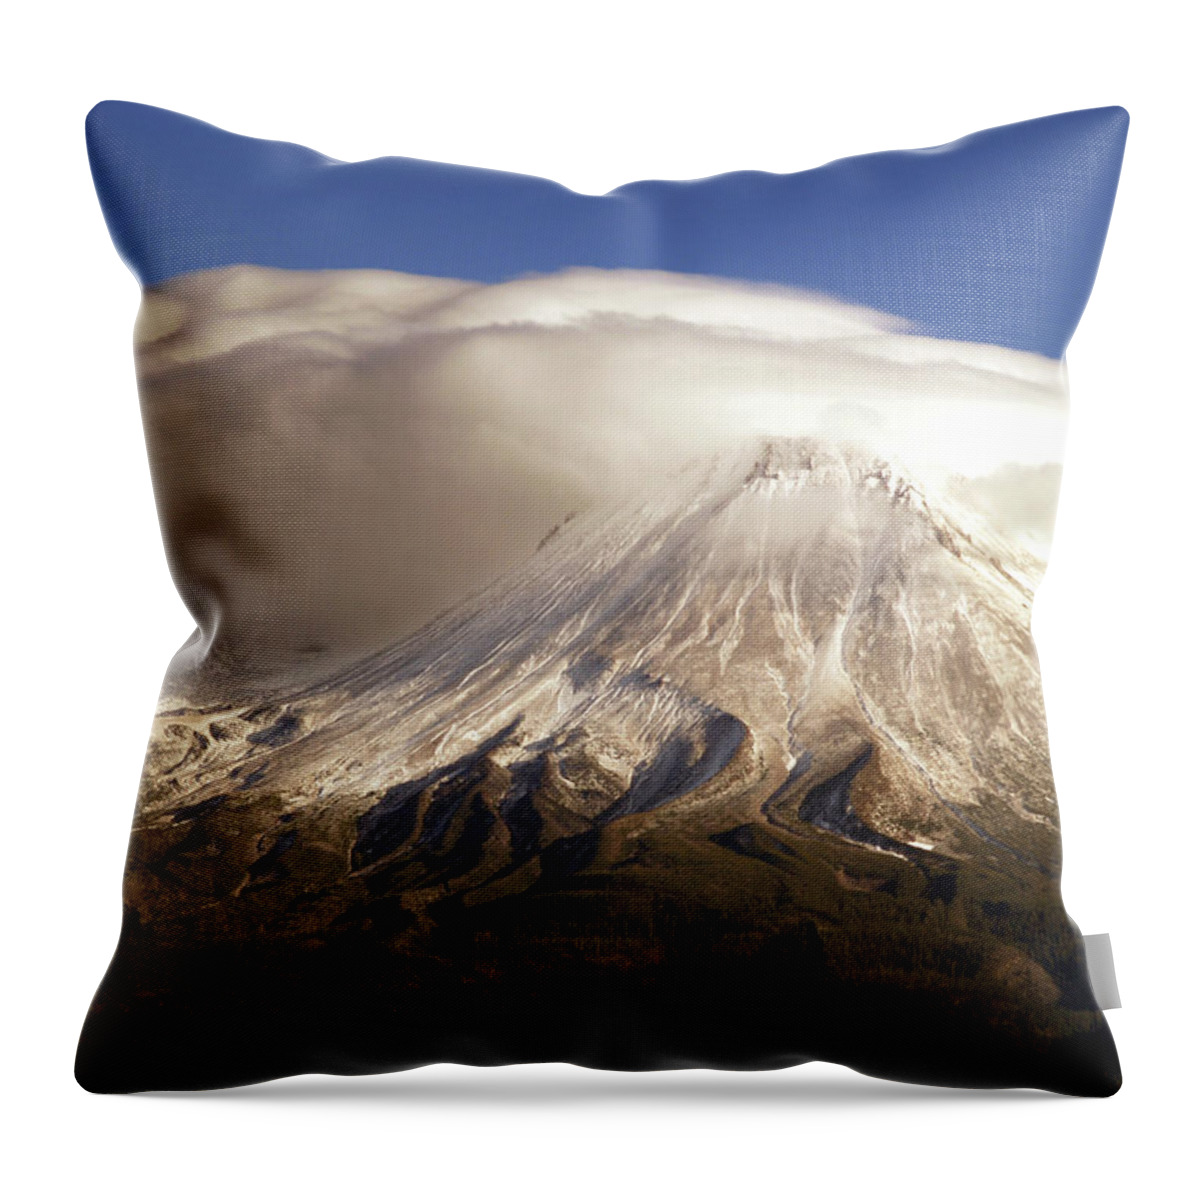 Mt Shasta Throw Pillow featuring the photograph Shasta Storm by Bill Gallagher